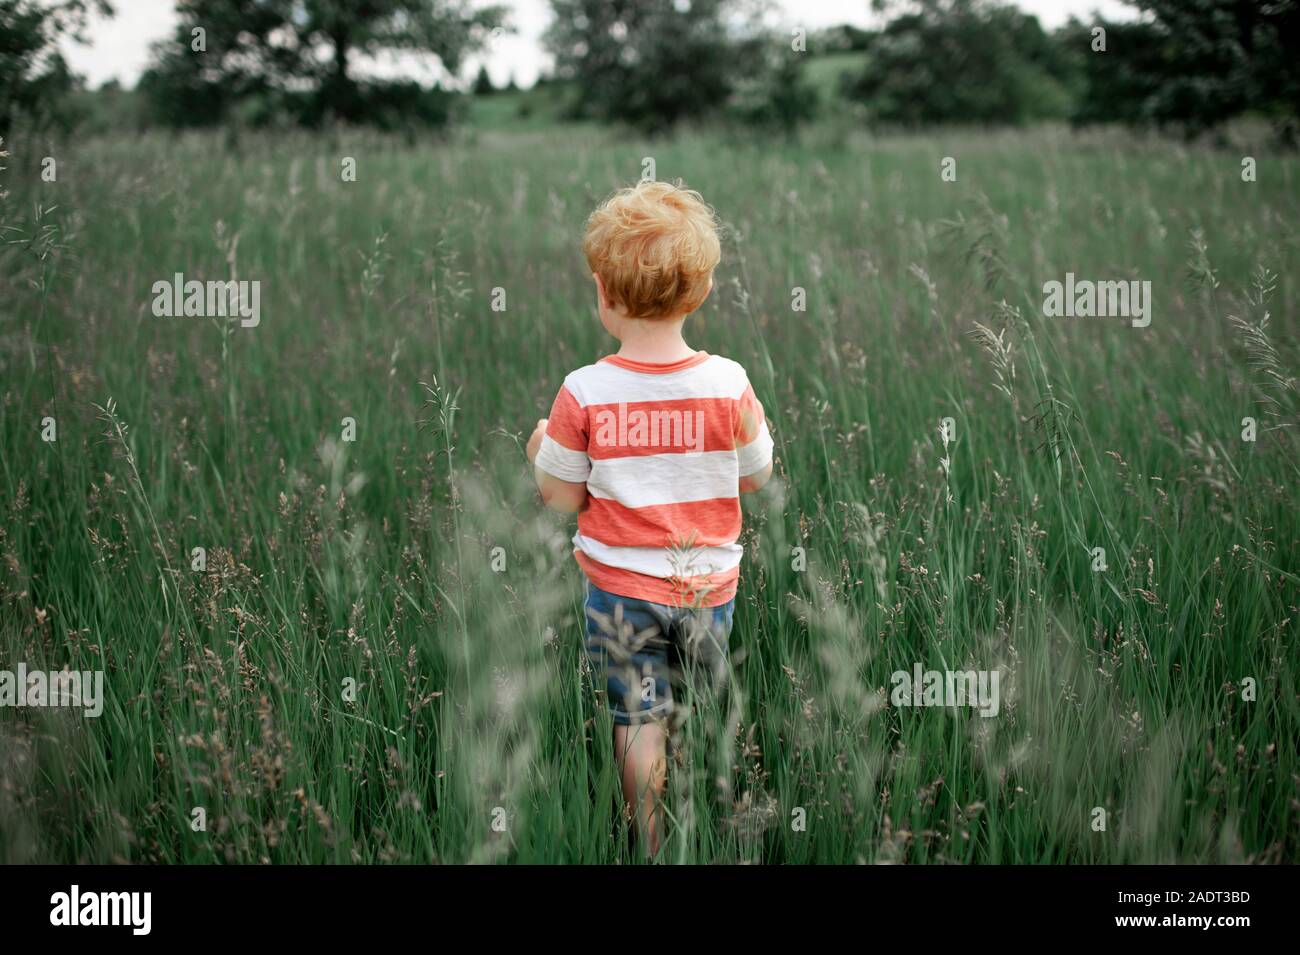 Toddler boy in striped shirt walking into a tall grassy field outdoors Stock Photo